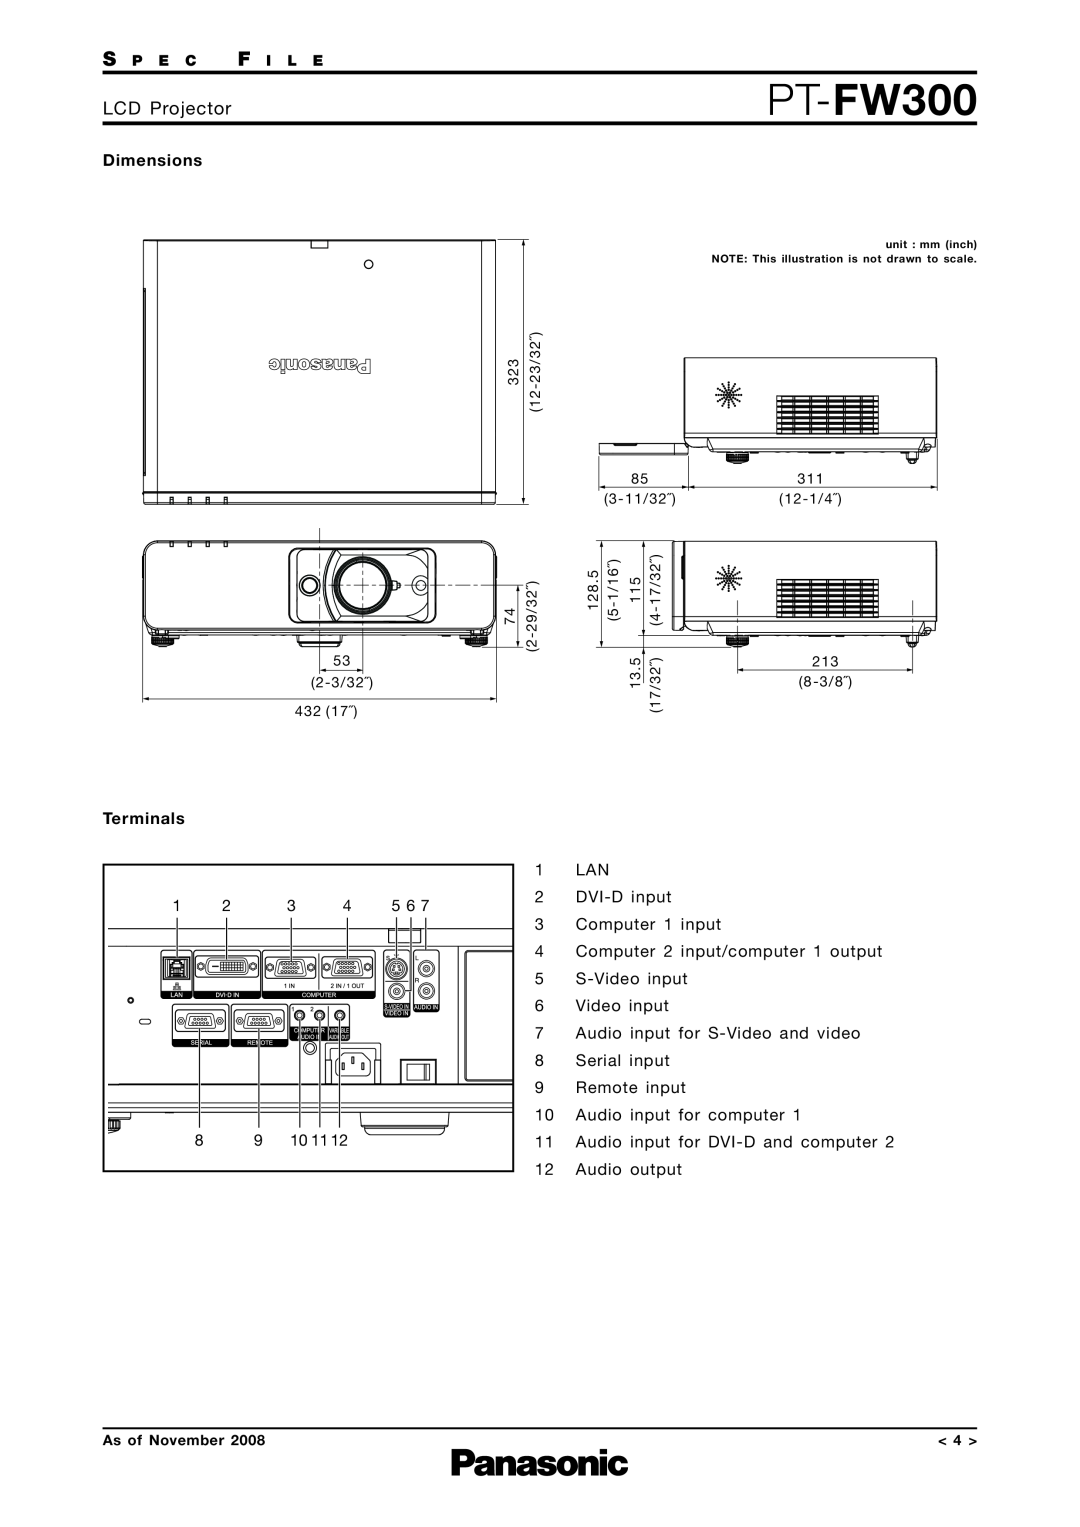 Panasonic PT-FW300 specifications Dimensions, Terminals, LCD Projector 